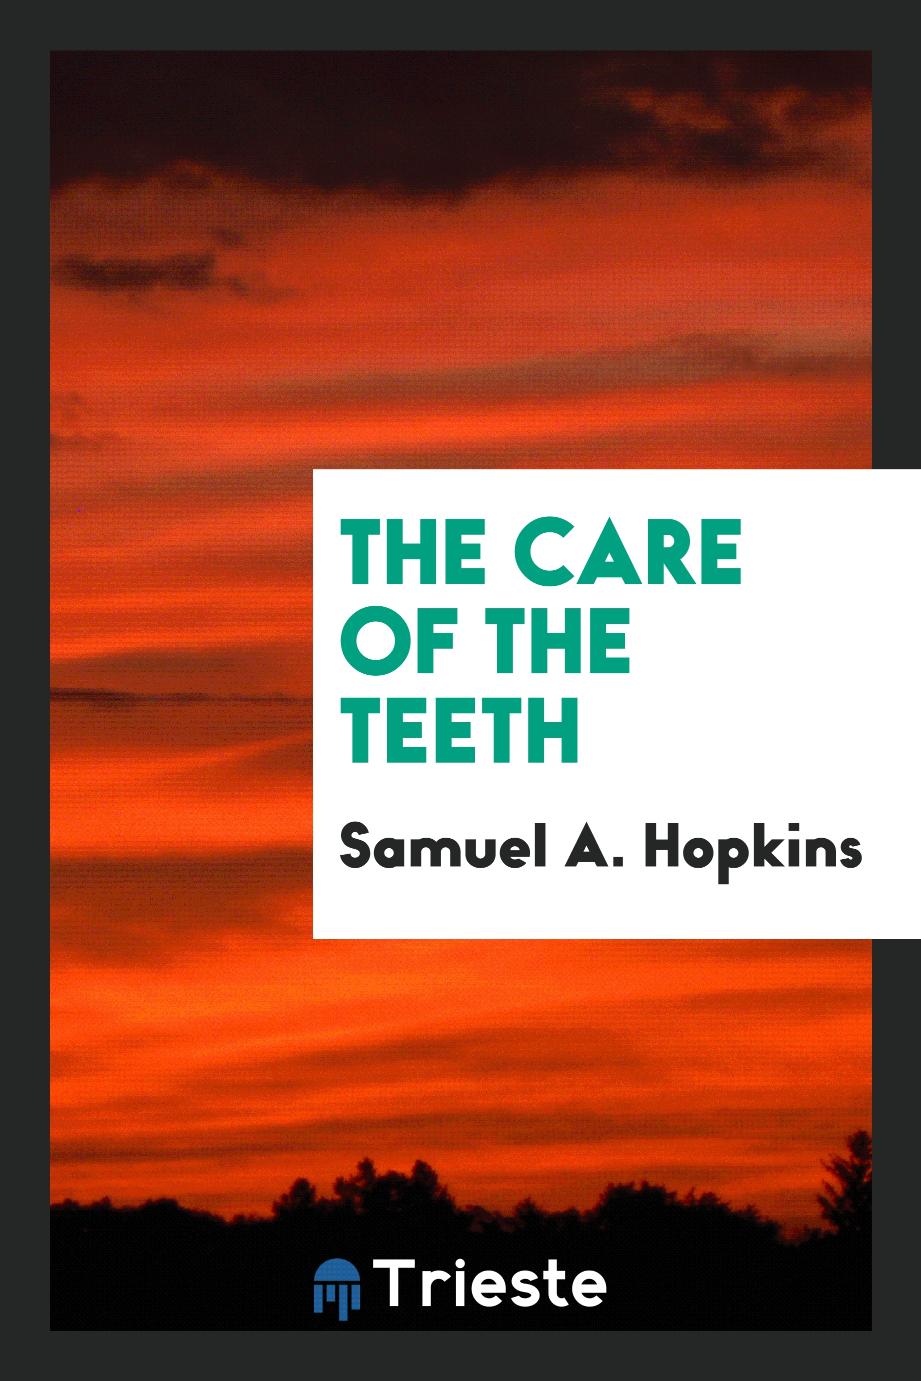 The Care of the Teeth